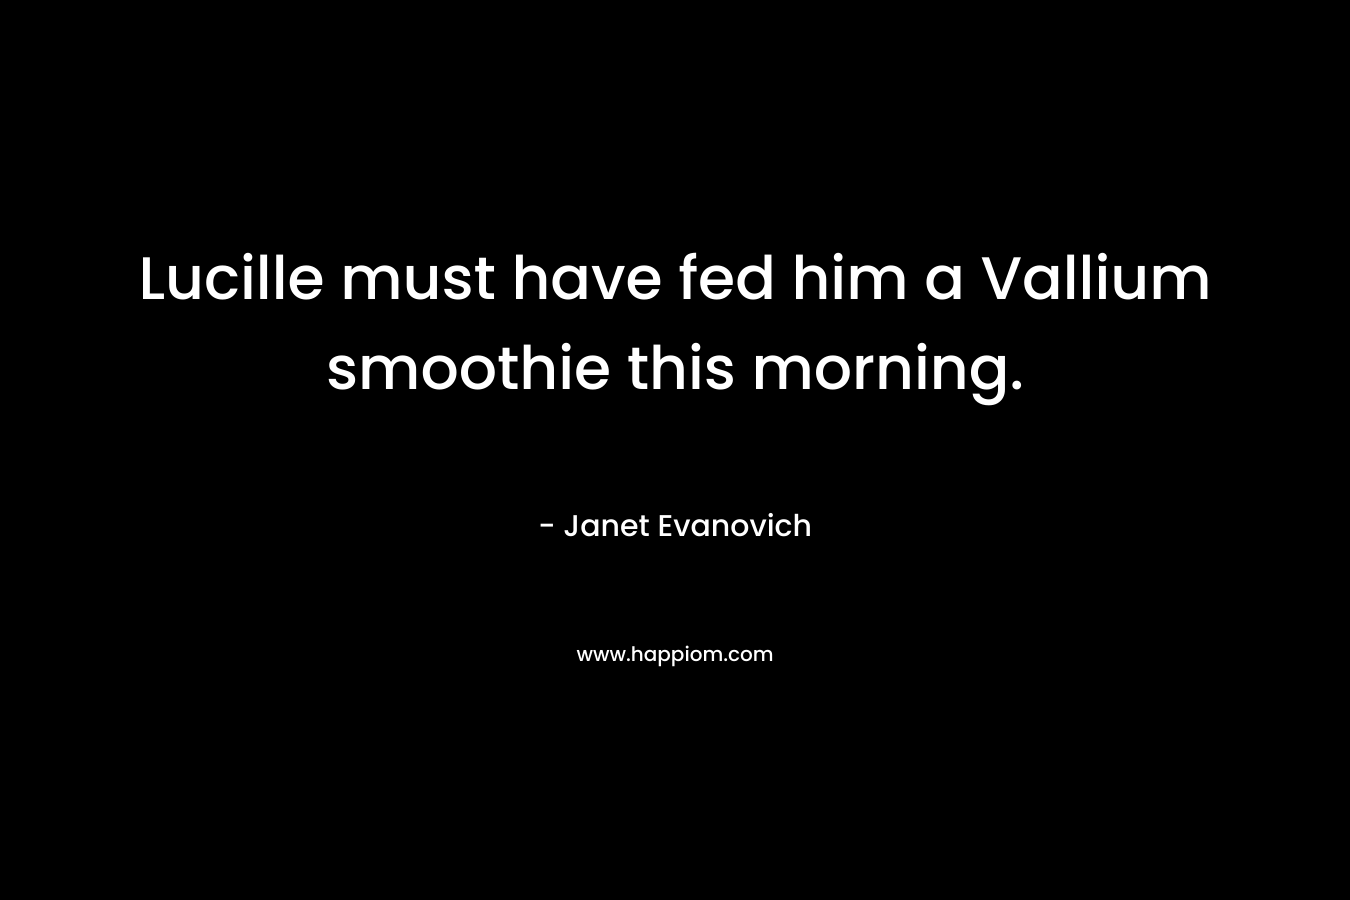 Lucille must have fed him a Vallium smoothie this morning.